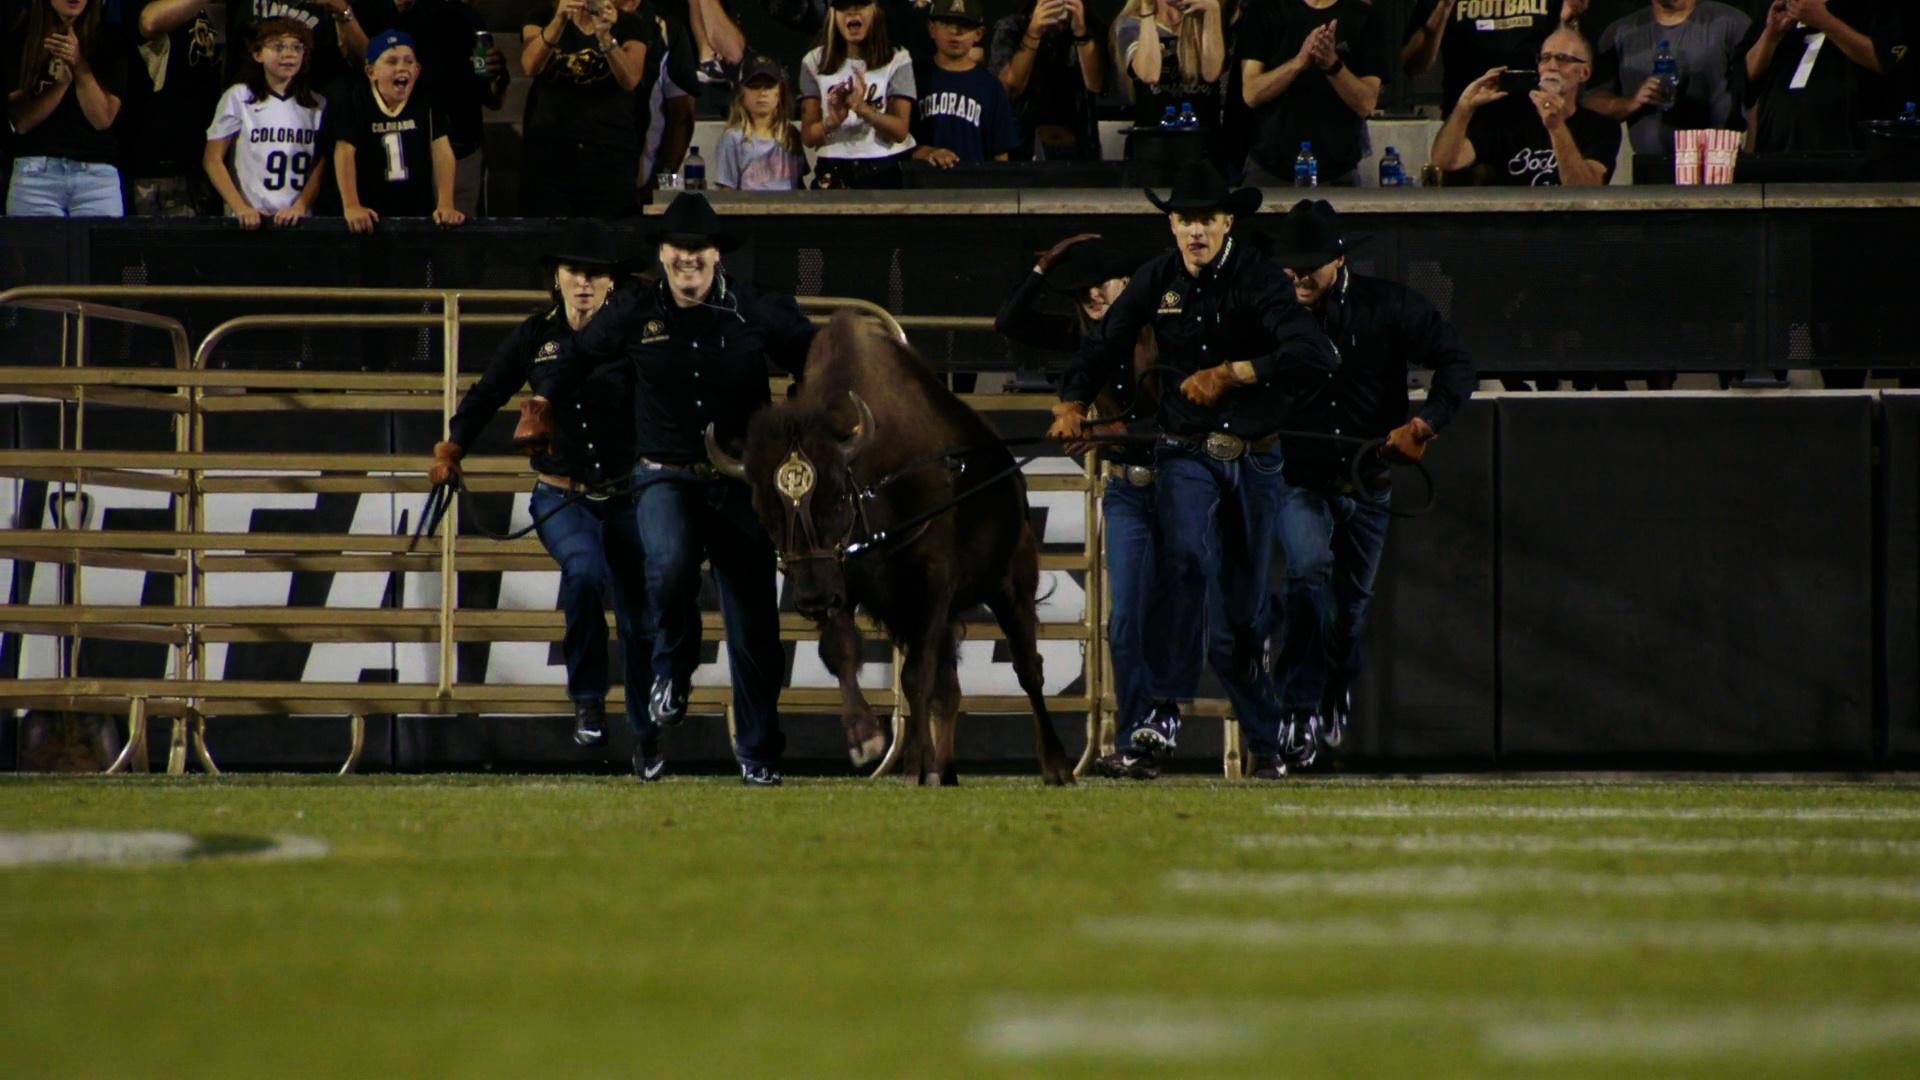 Colorado Buffaloes thrash #1 LSU Tigers in blowout win - The Ralphie Report